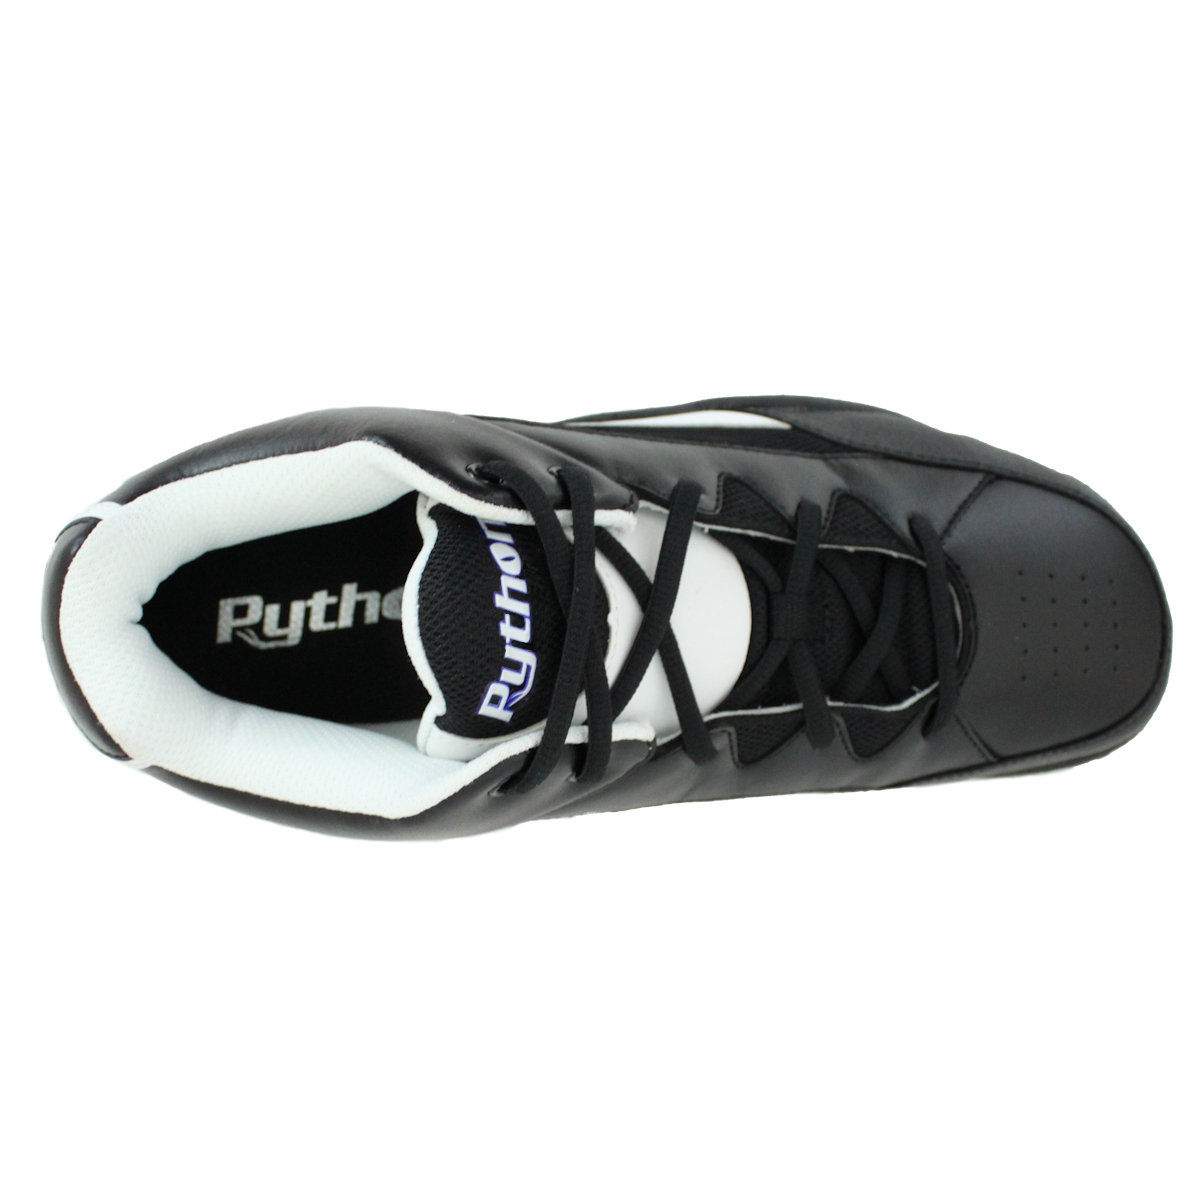 Python Wide (EE) Width Indoor Black Mid Size Racquetball (Squash, Badminton, Volleyball) Shoe - image 4 of 6